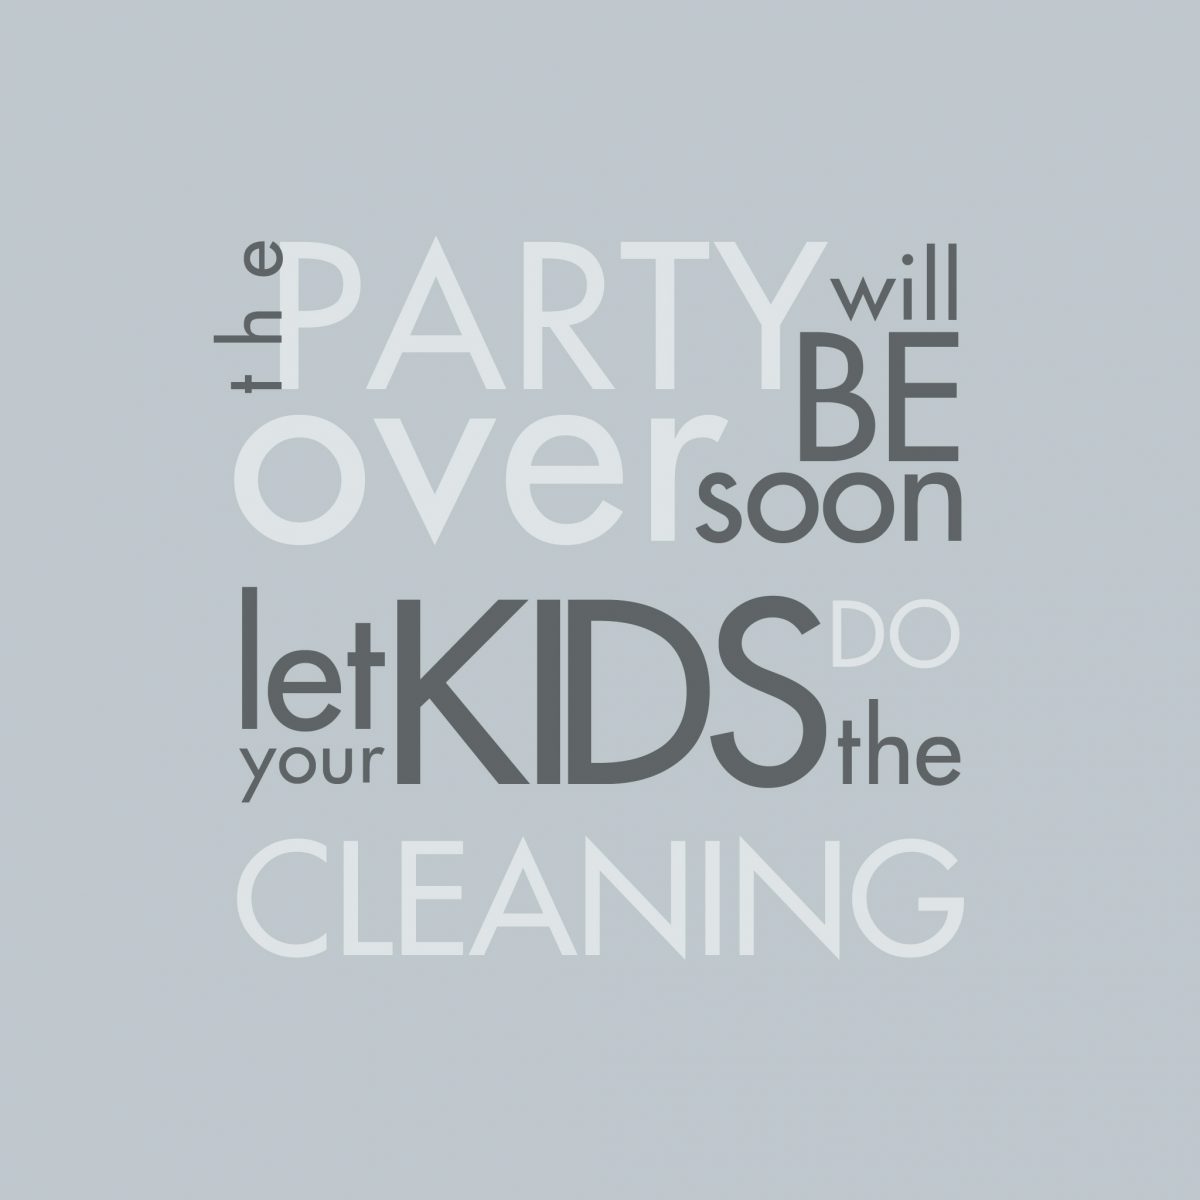 The party will be over soon, let your kids do the cleaning, design, digital, ch3